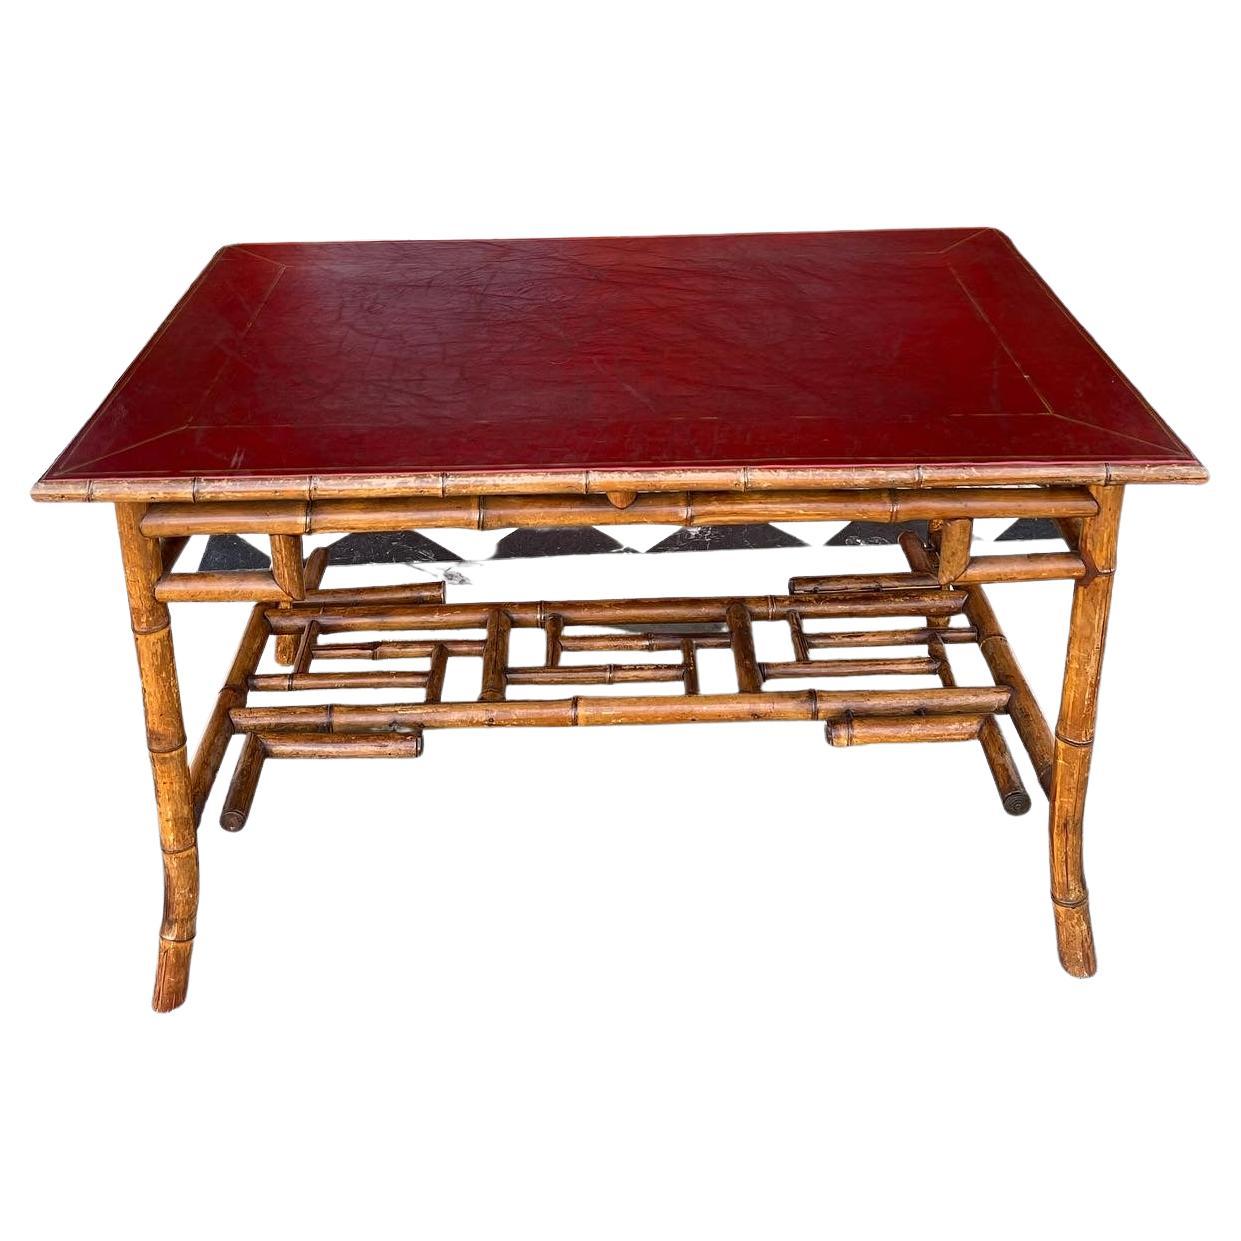 Faux Bamboo Red Leather Top Writing Desk, Mid-20th Century For Sale